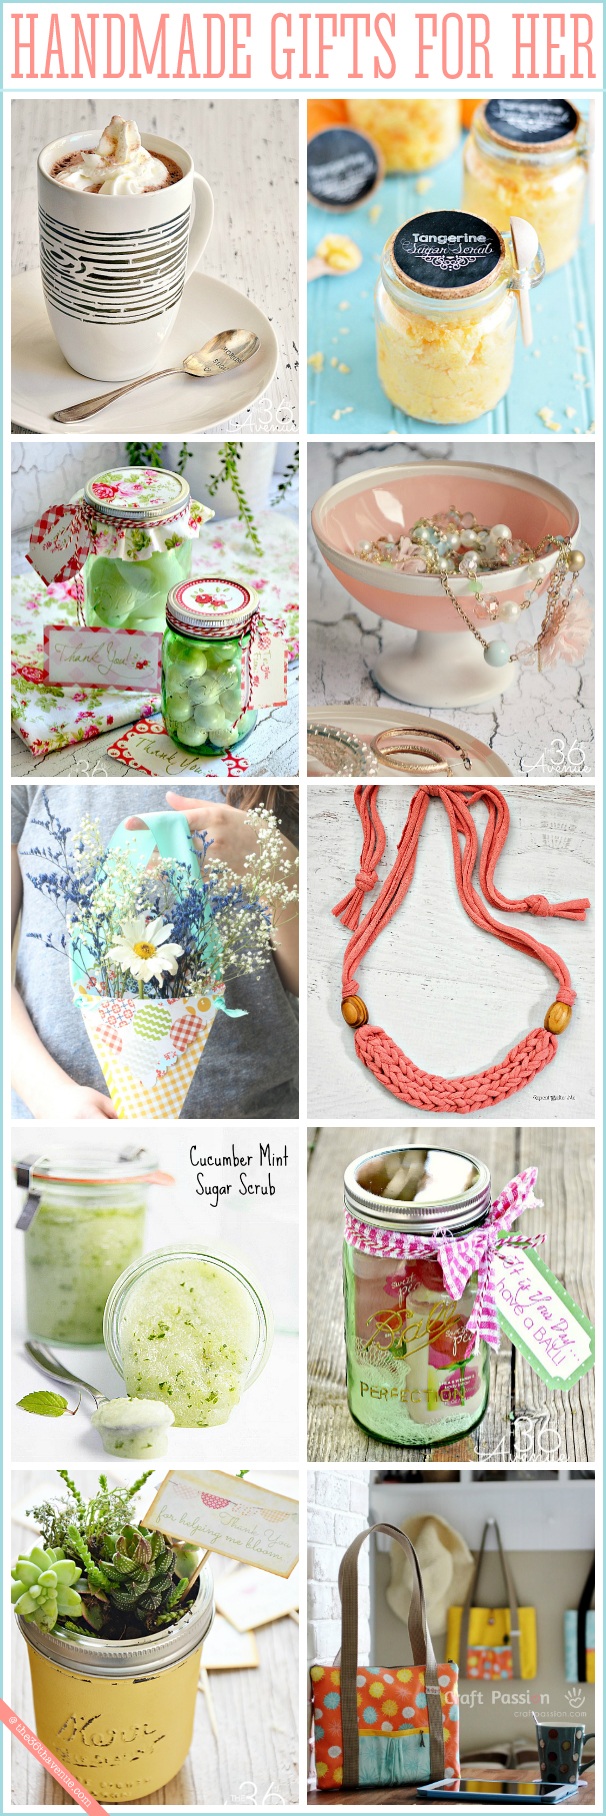 diy gifts for women